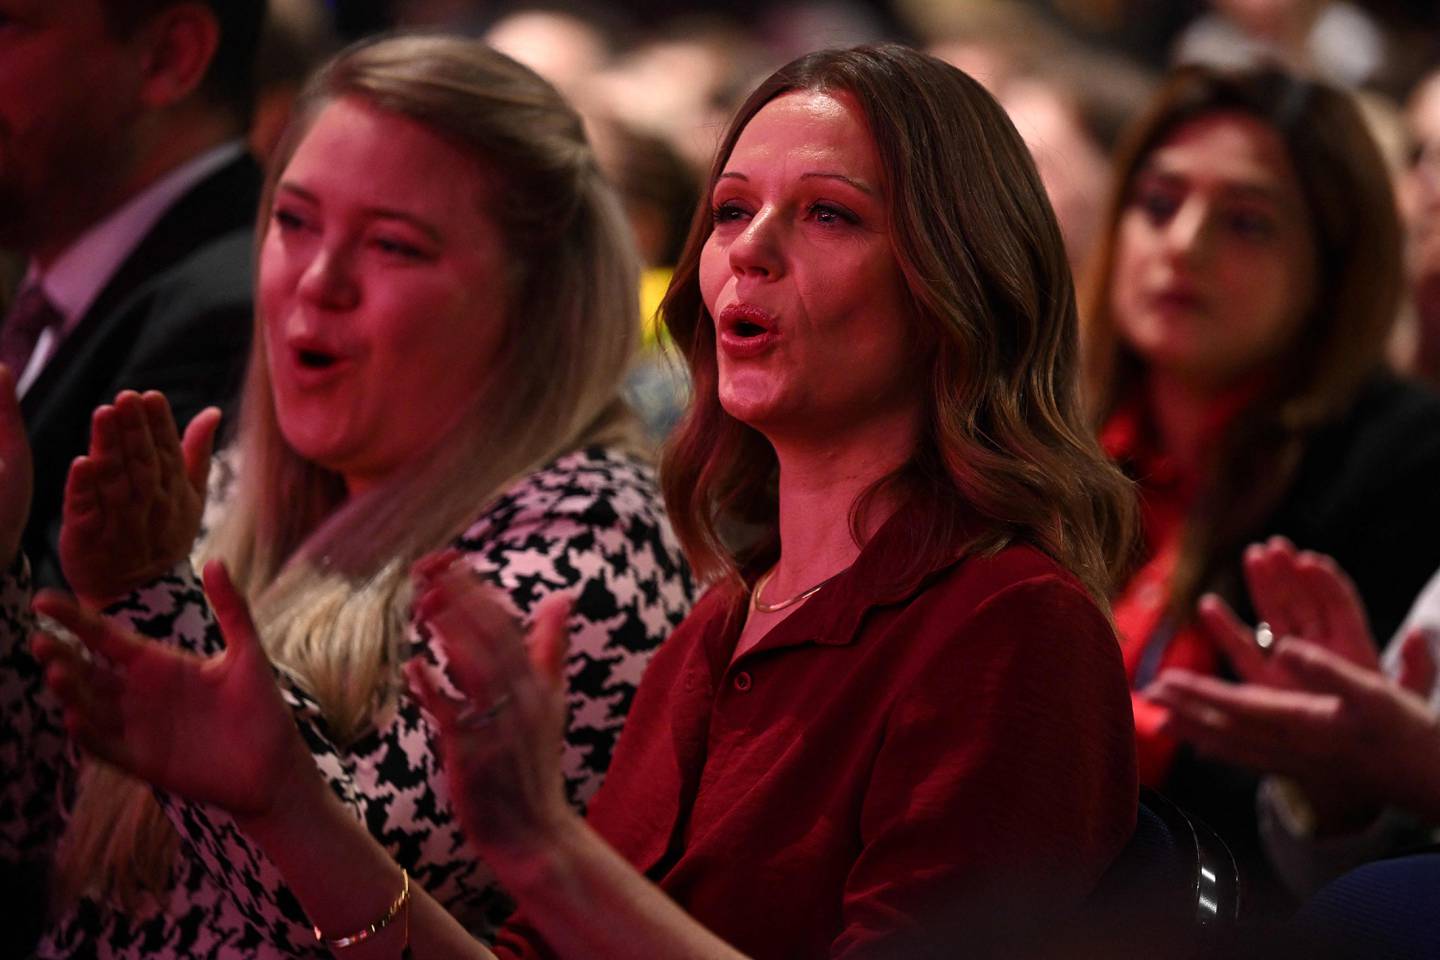 Victoria Starmer cheers on her husband during his speech at the Labour party conference in Liverpool on Wednesday. AFP